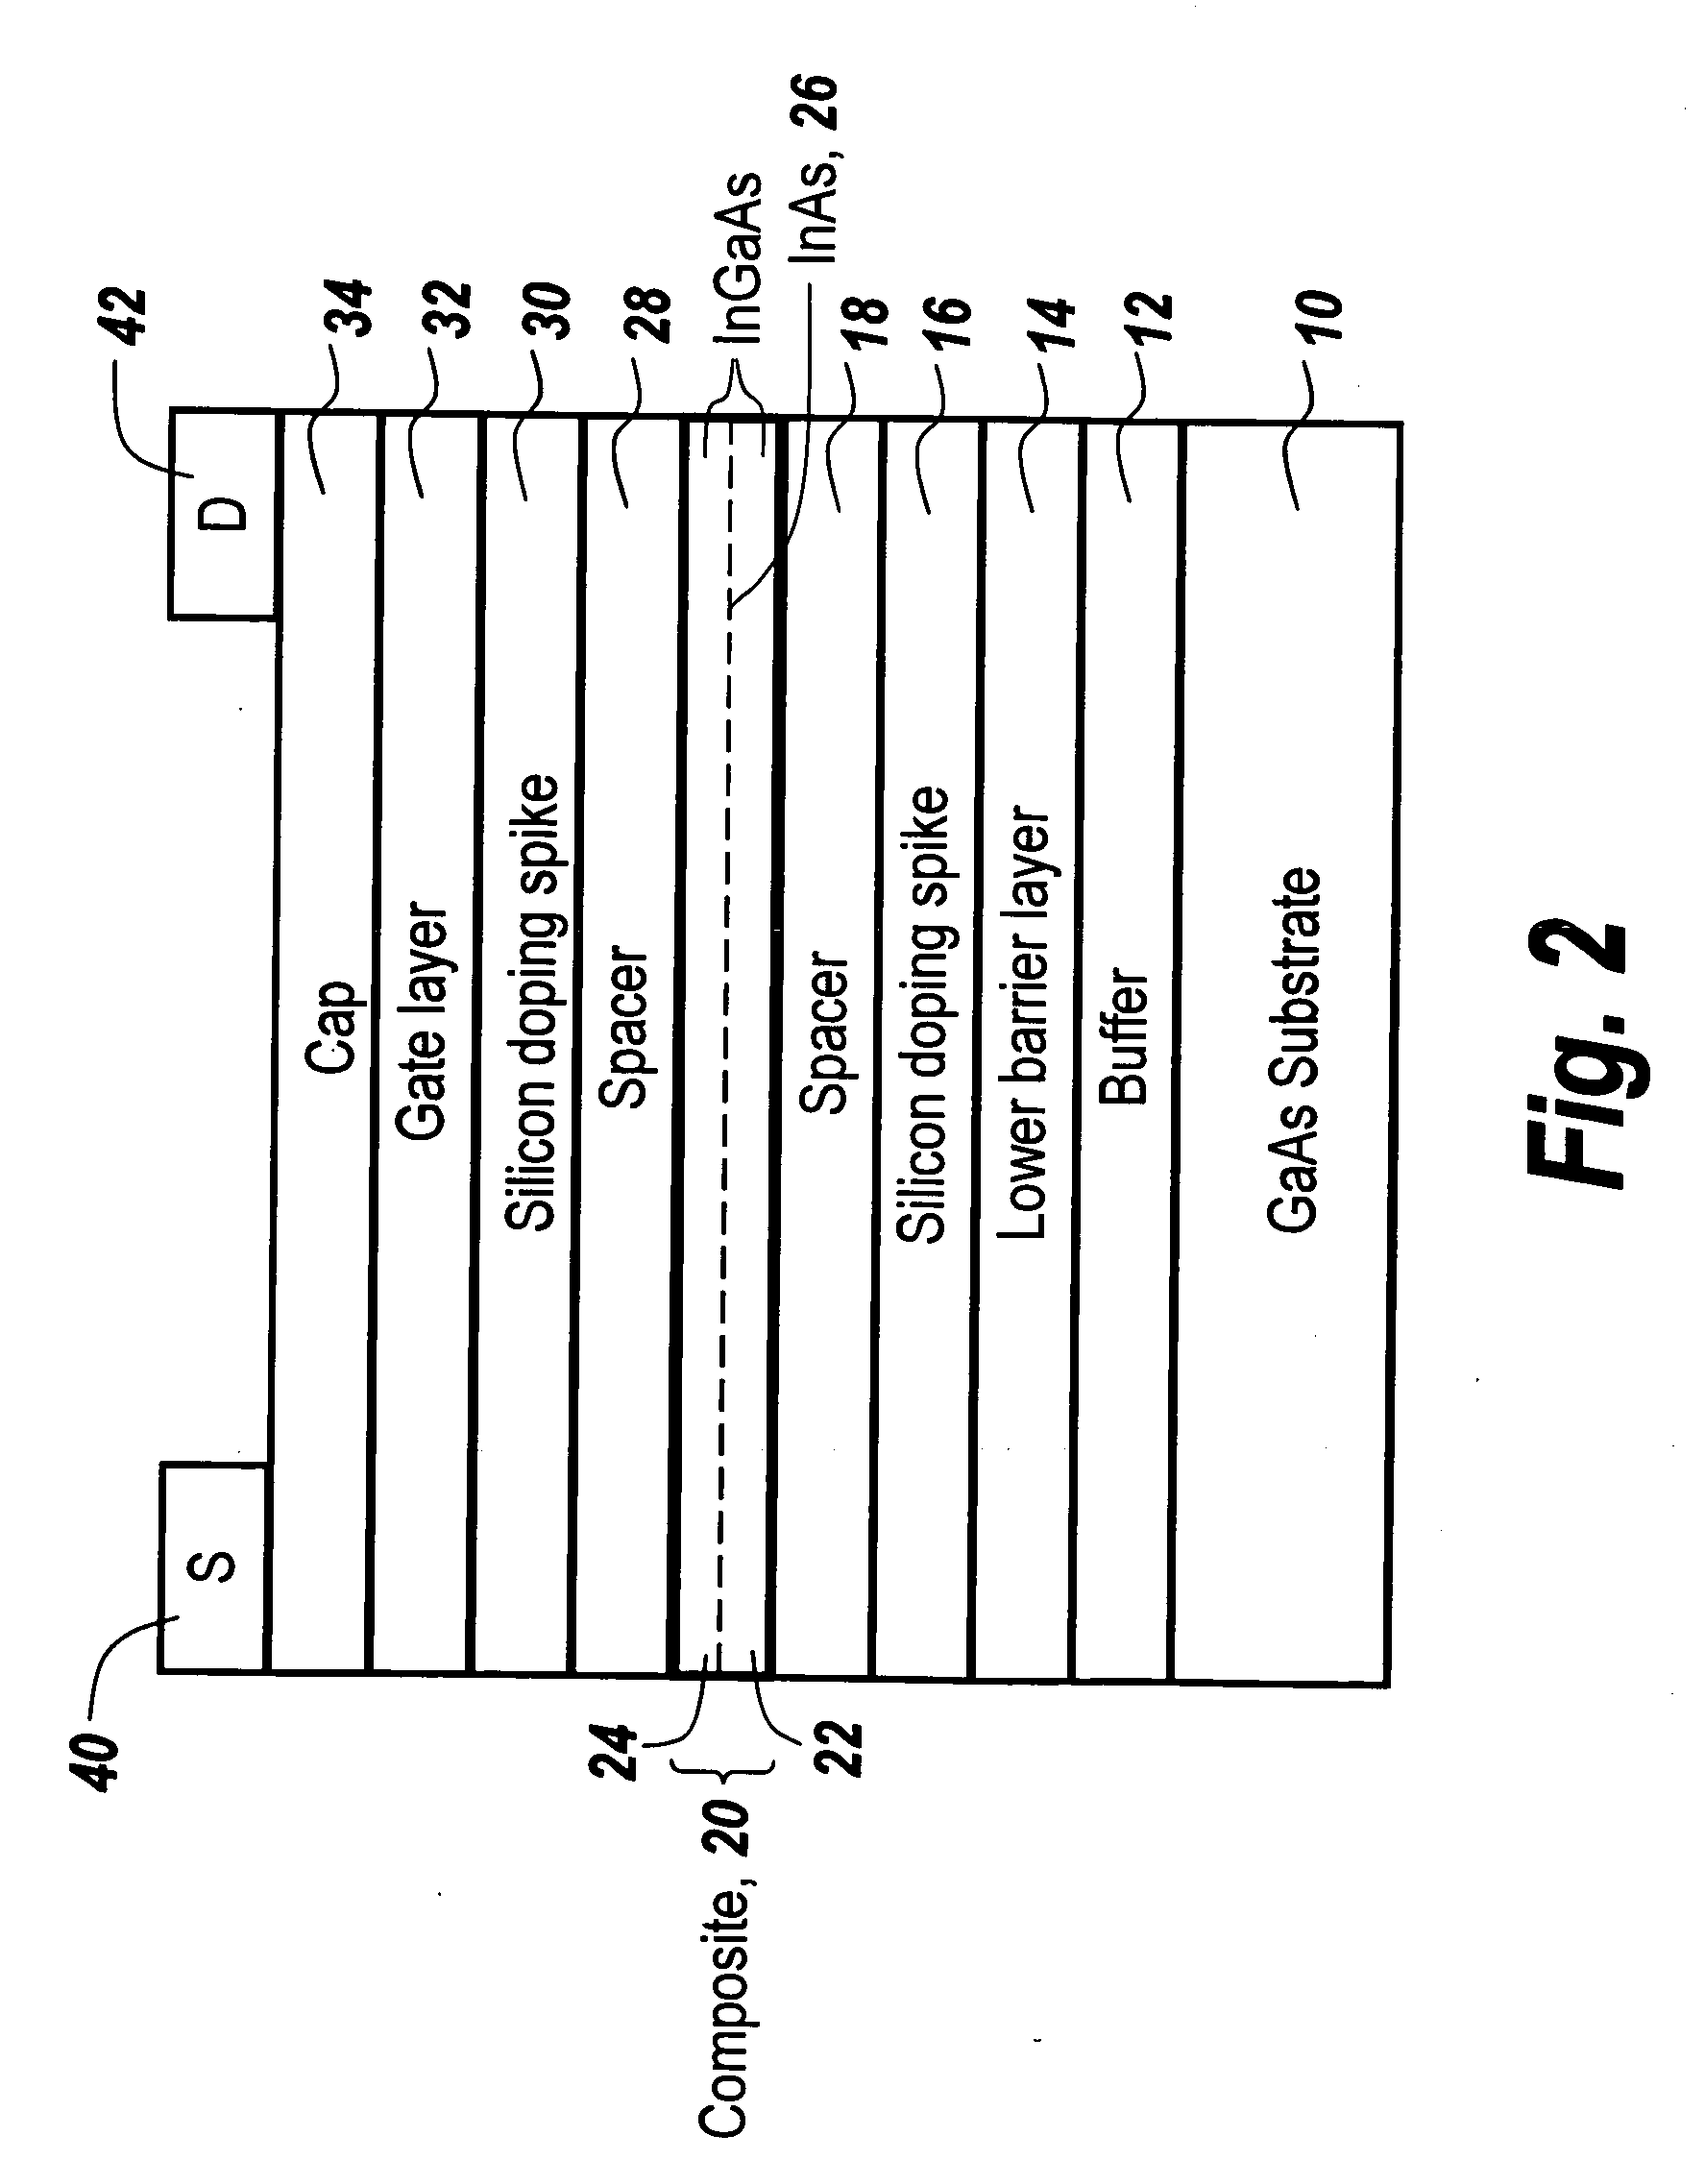 Asymmetrically recessed high-power and high-gain ultra-short gate HEMT device